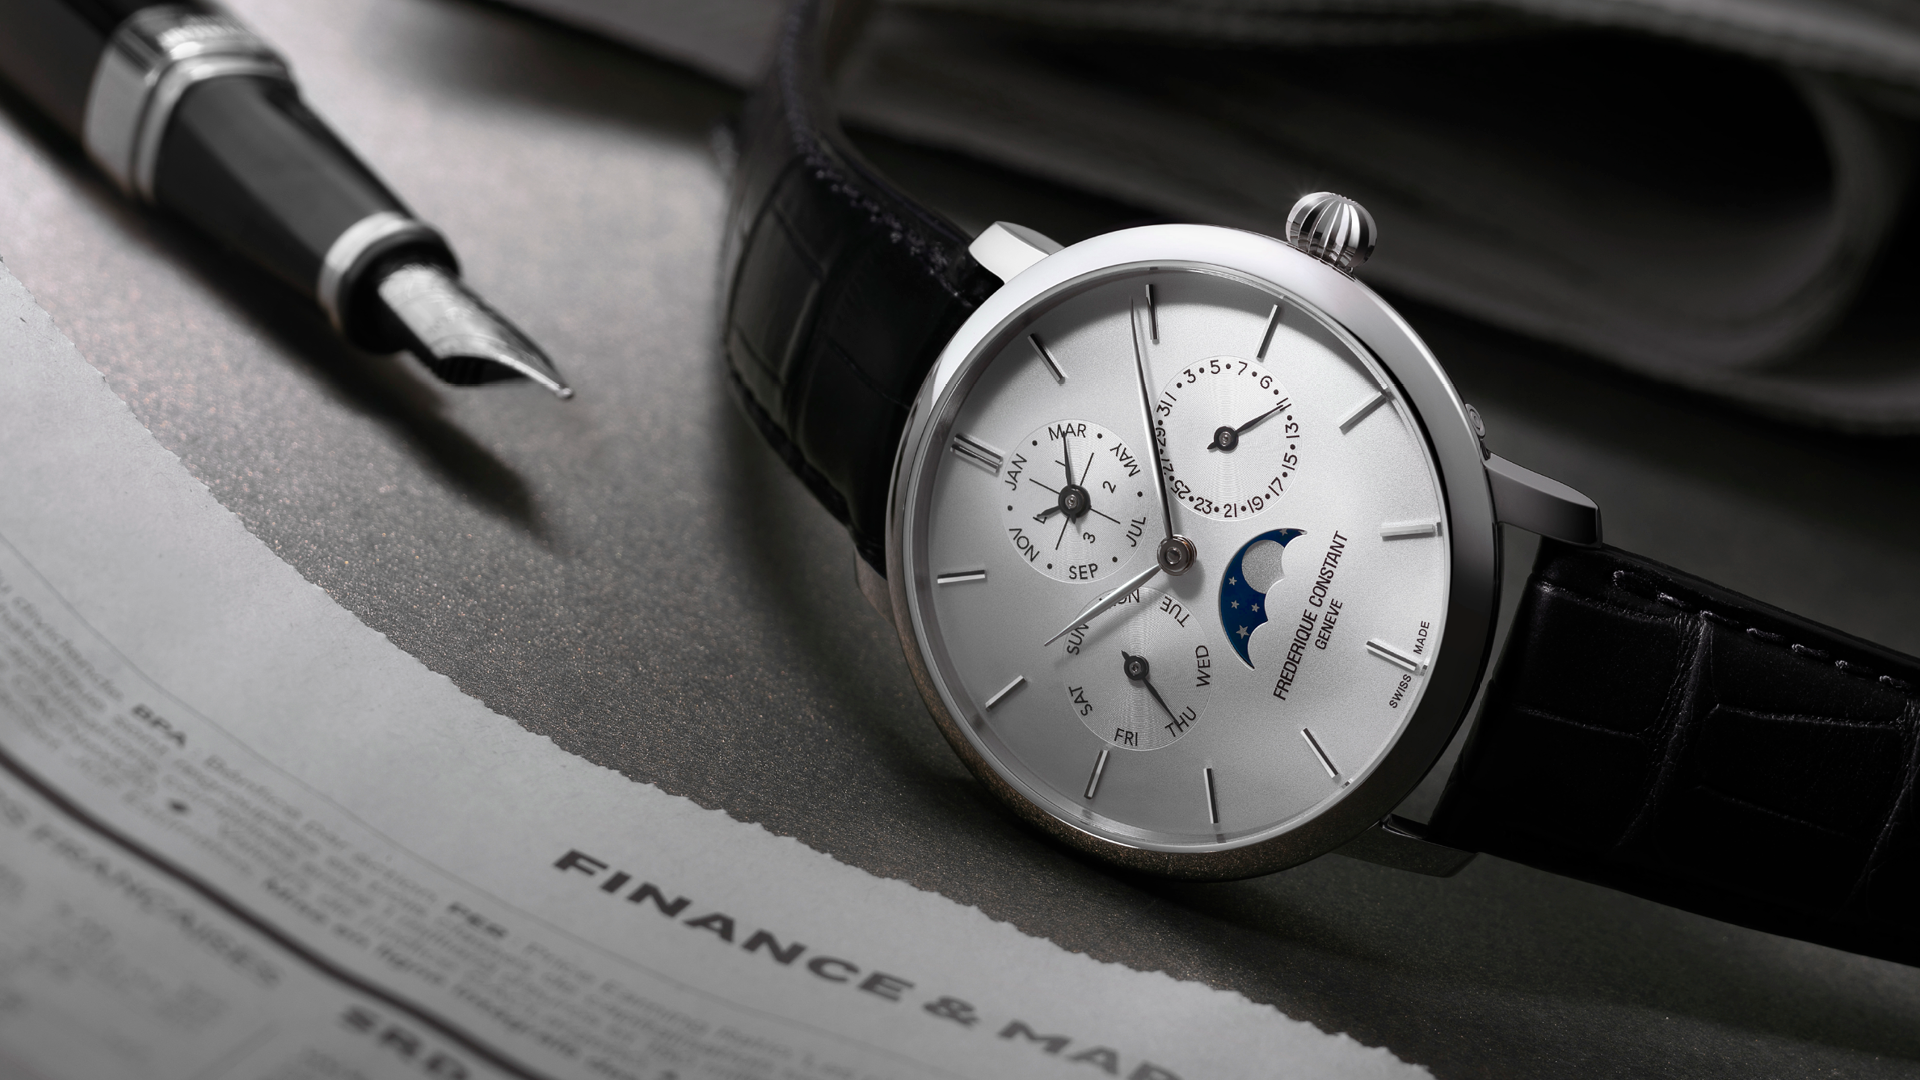 Slimline Perpetual Calendar Manufacture watch for man.   Automatic movement, white dial, stainless-steel case, date, day and month counters, moonphase and black leather strap